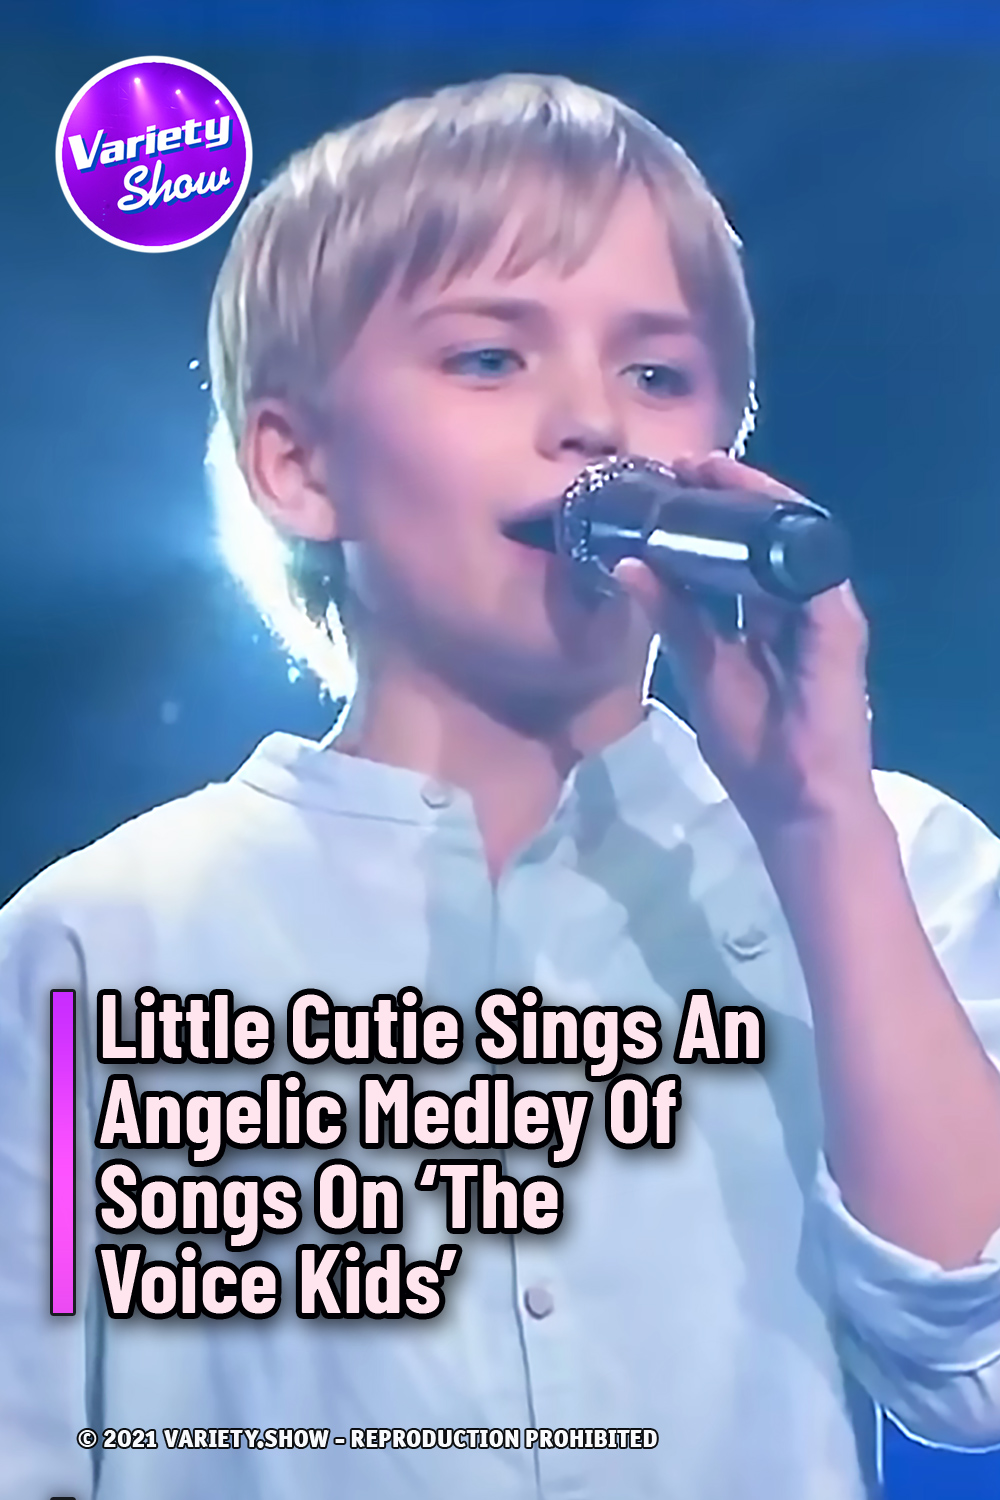 Little Cutie Sings An Angelic Medley Of Songs On ‘The Voice Kids’